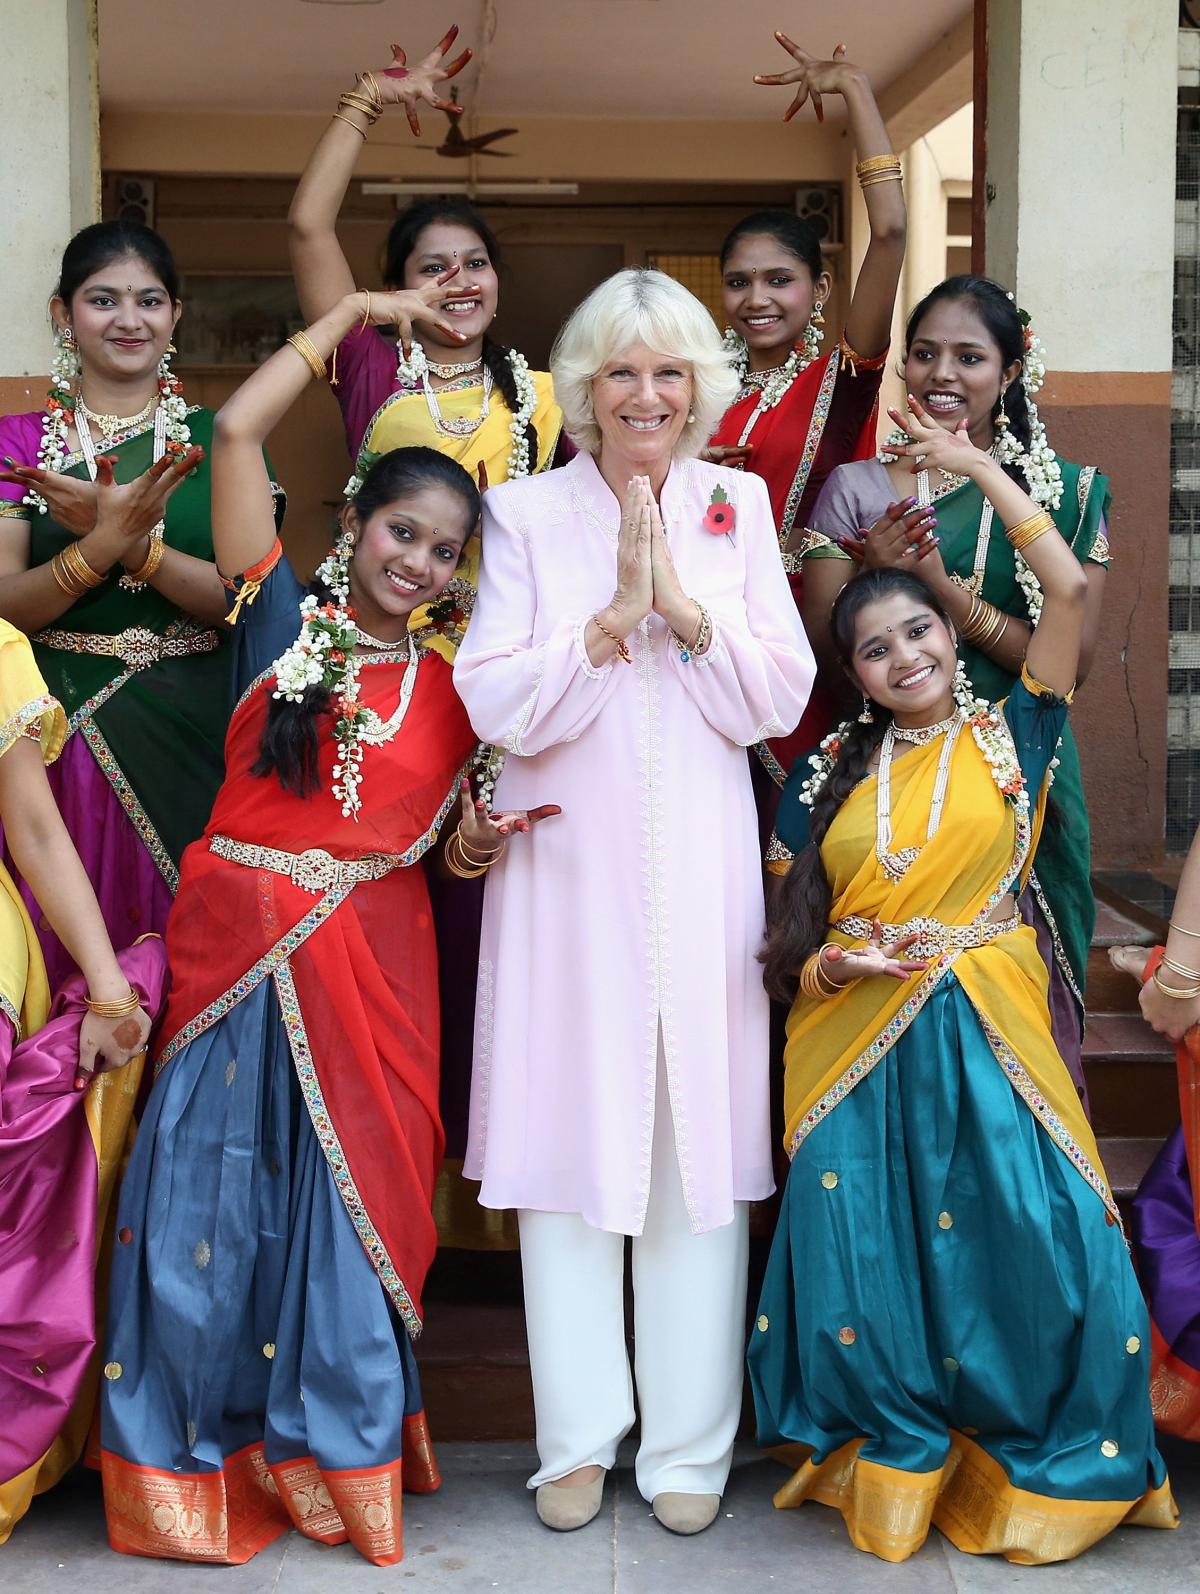 The Duchess of Cornwall is shown some Indian dance moves by girls from Asha Sadan (House of Hope) for children who have been abandoned or abused, in Mumbai